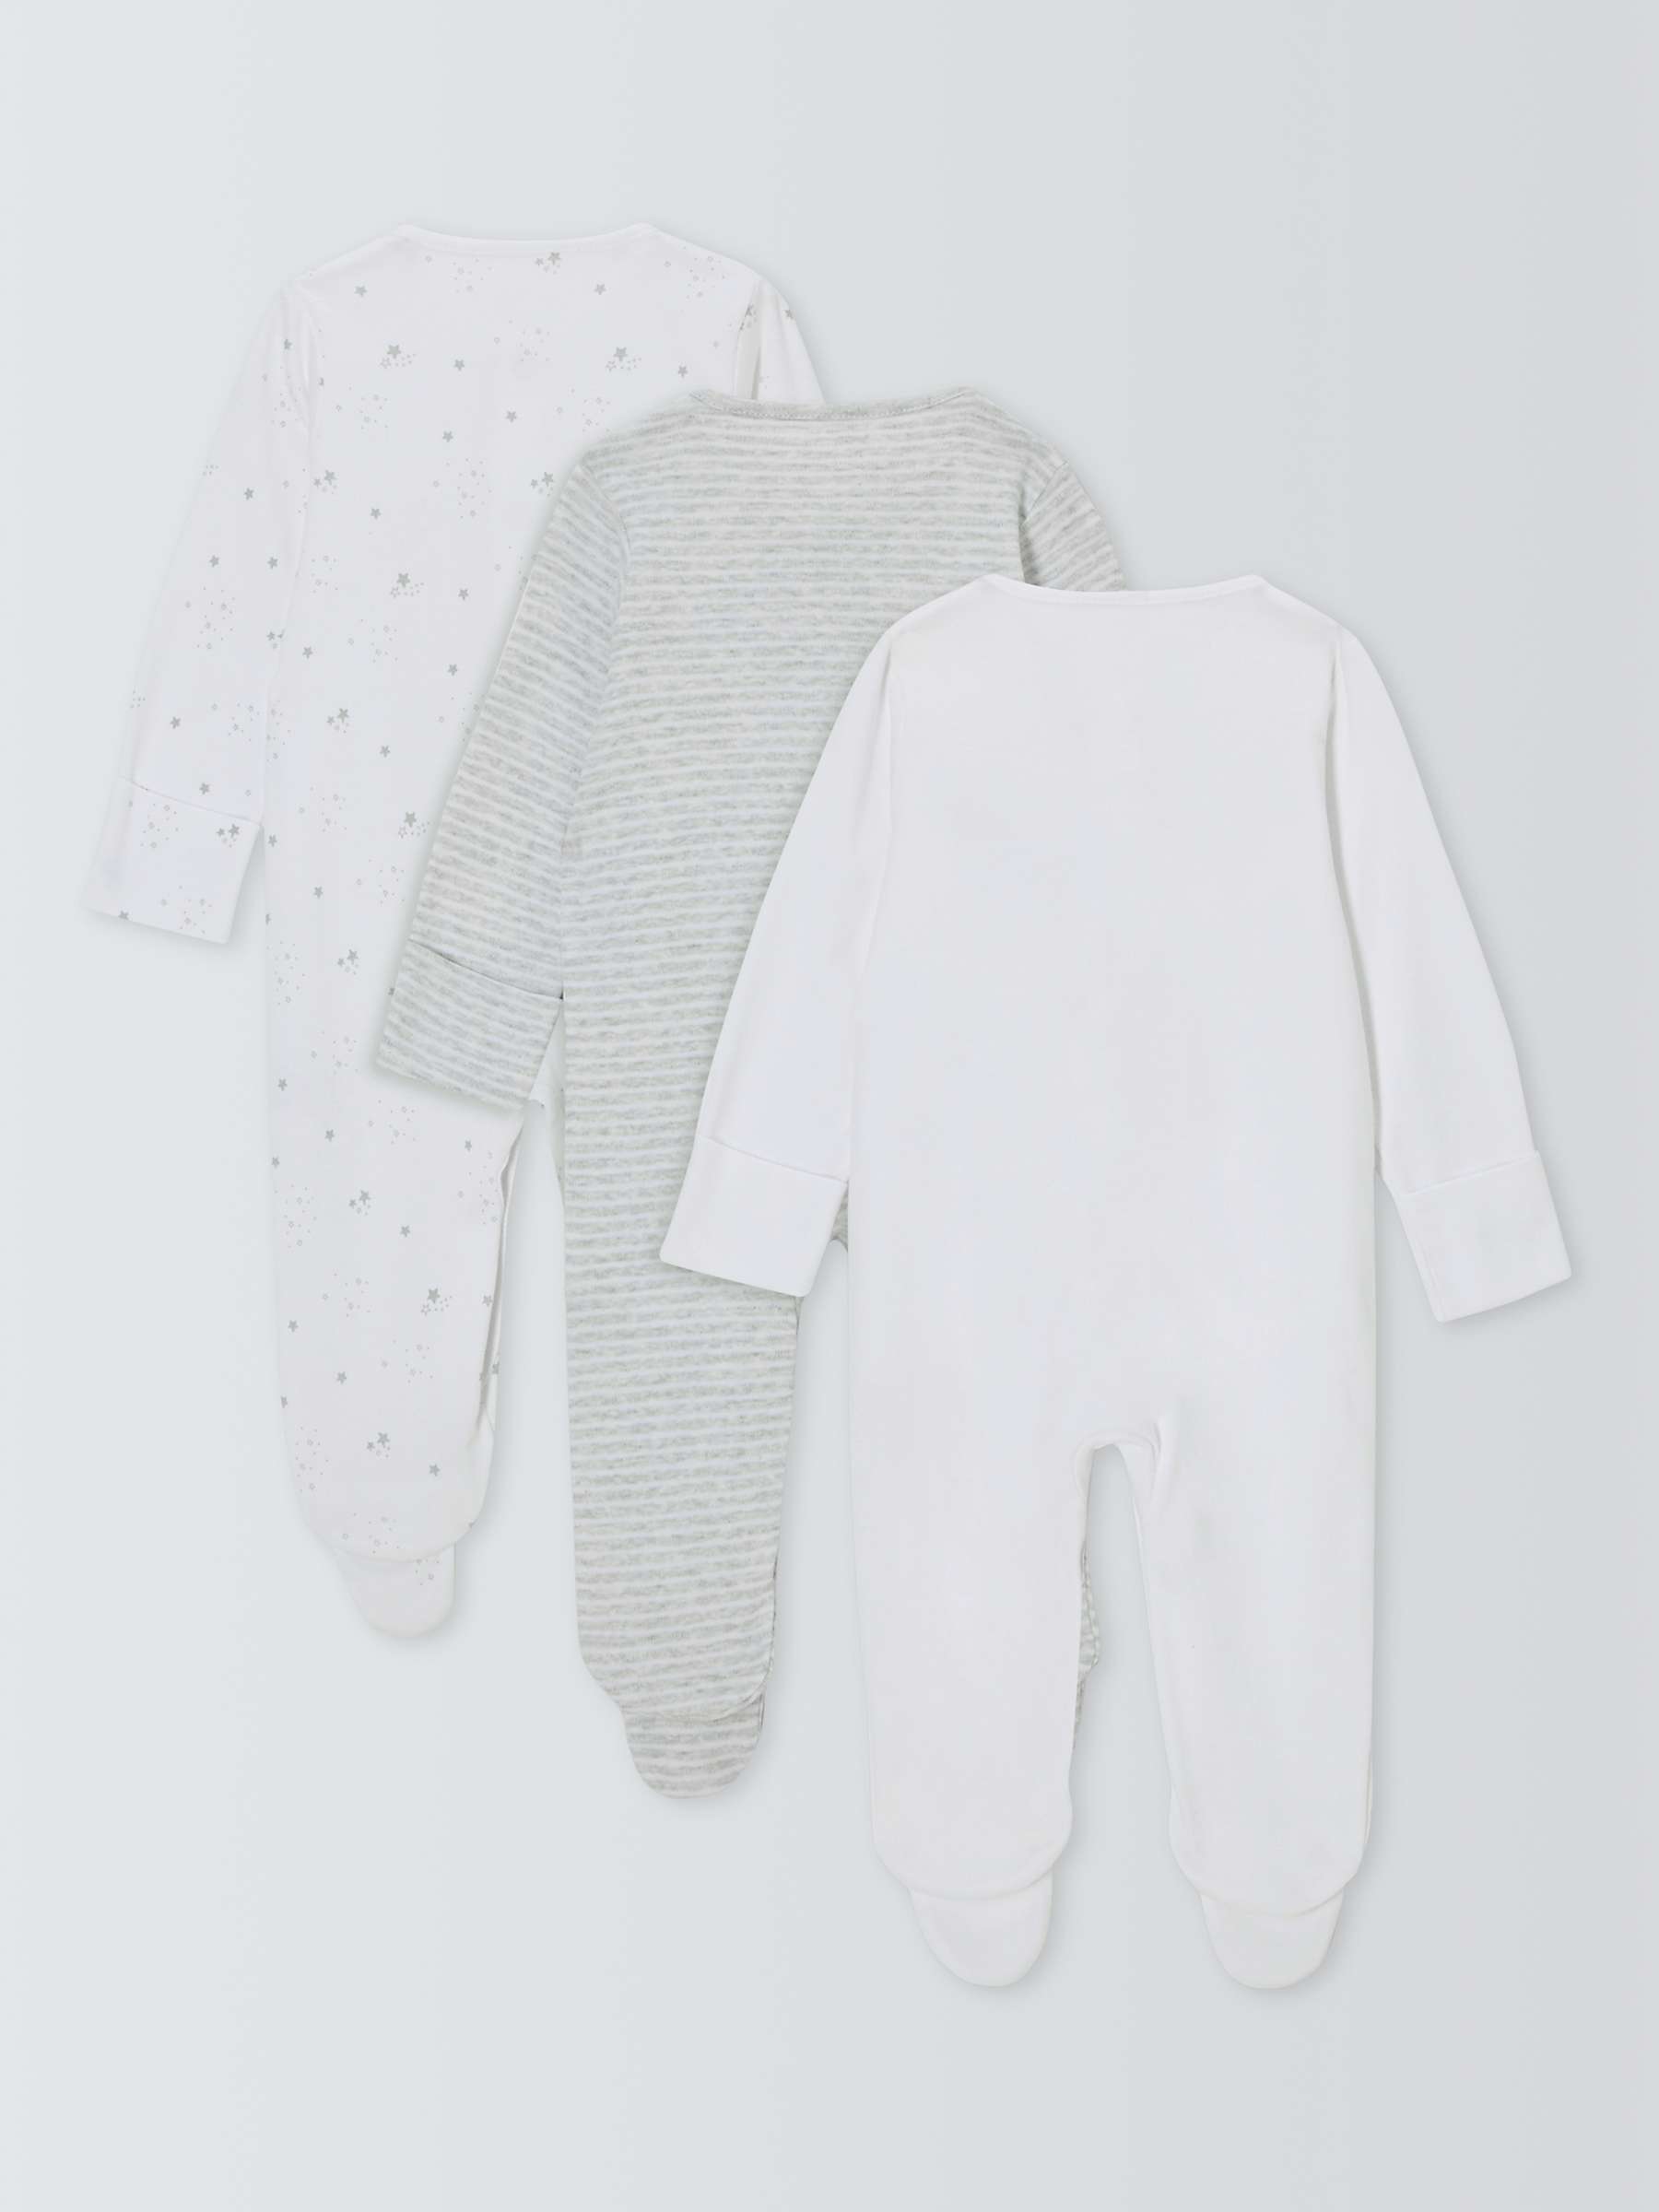 Buy John Lewis Baby Cotton Star Print Sleepsuits, Pack of 3, White Online at johnlewis.com